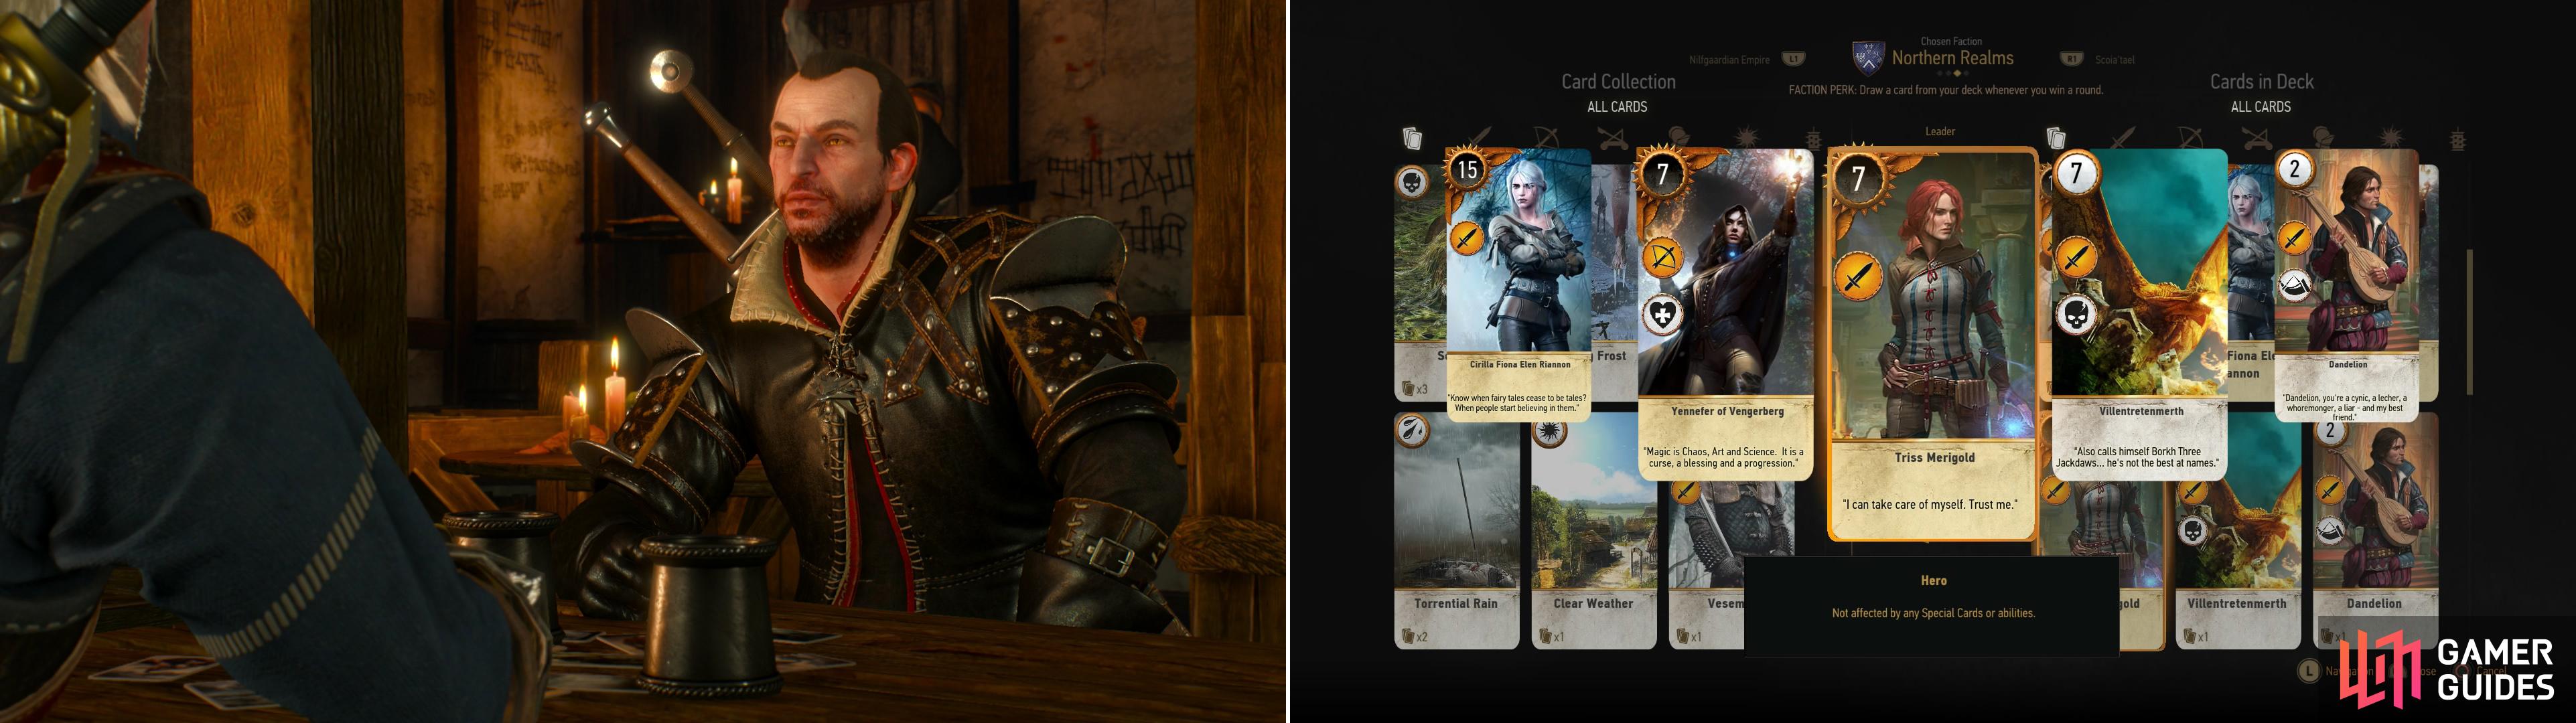 Your old friend Lambert can be played after helping him out in Skellige (left). If you win you'll obtain the Triss Merigold card (right).